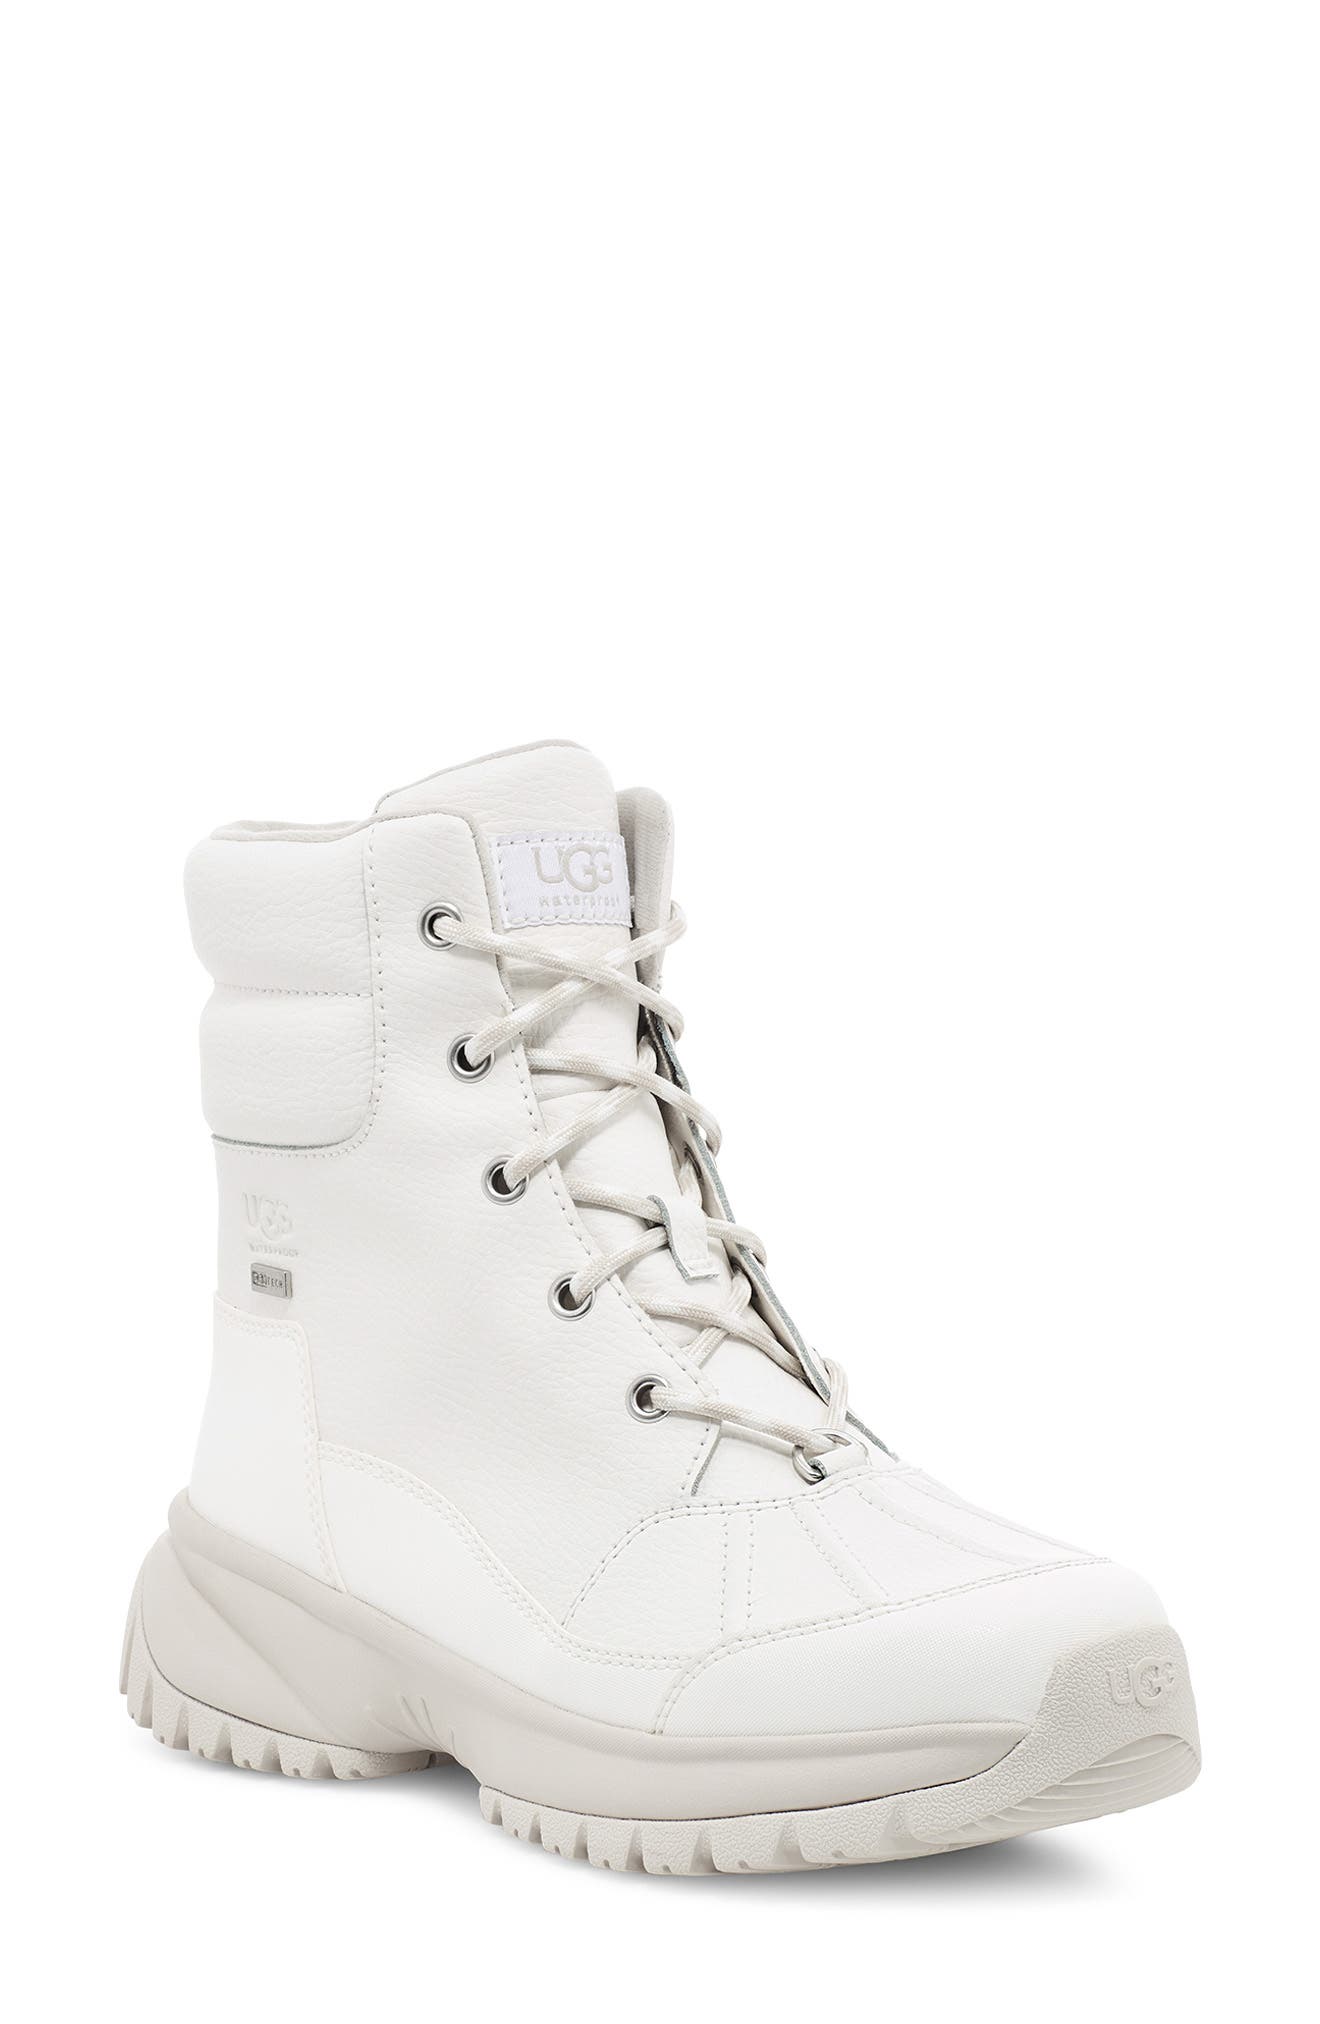 ugg women's lace up boot